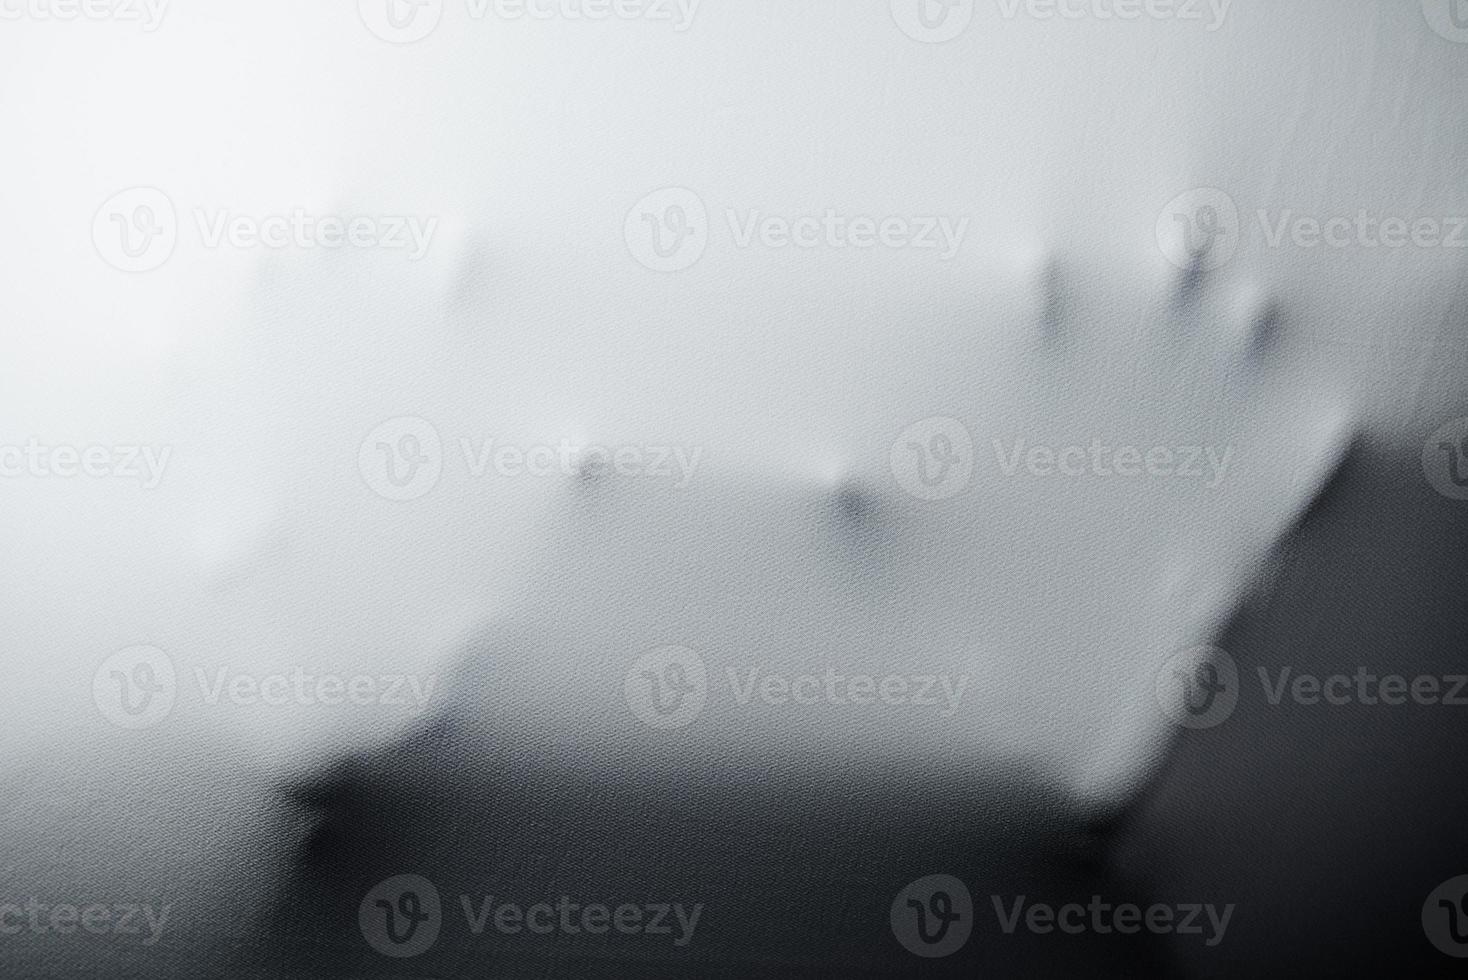 The fade structure and shade of hands photo